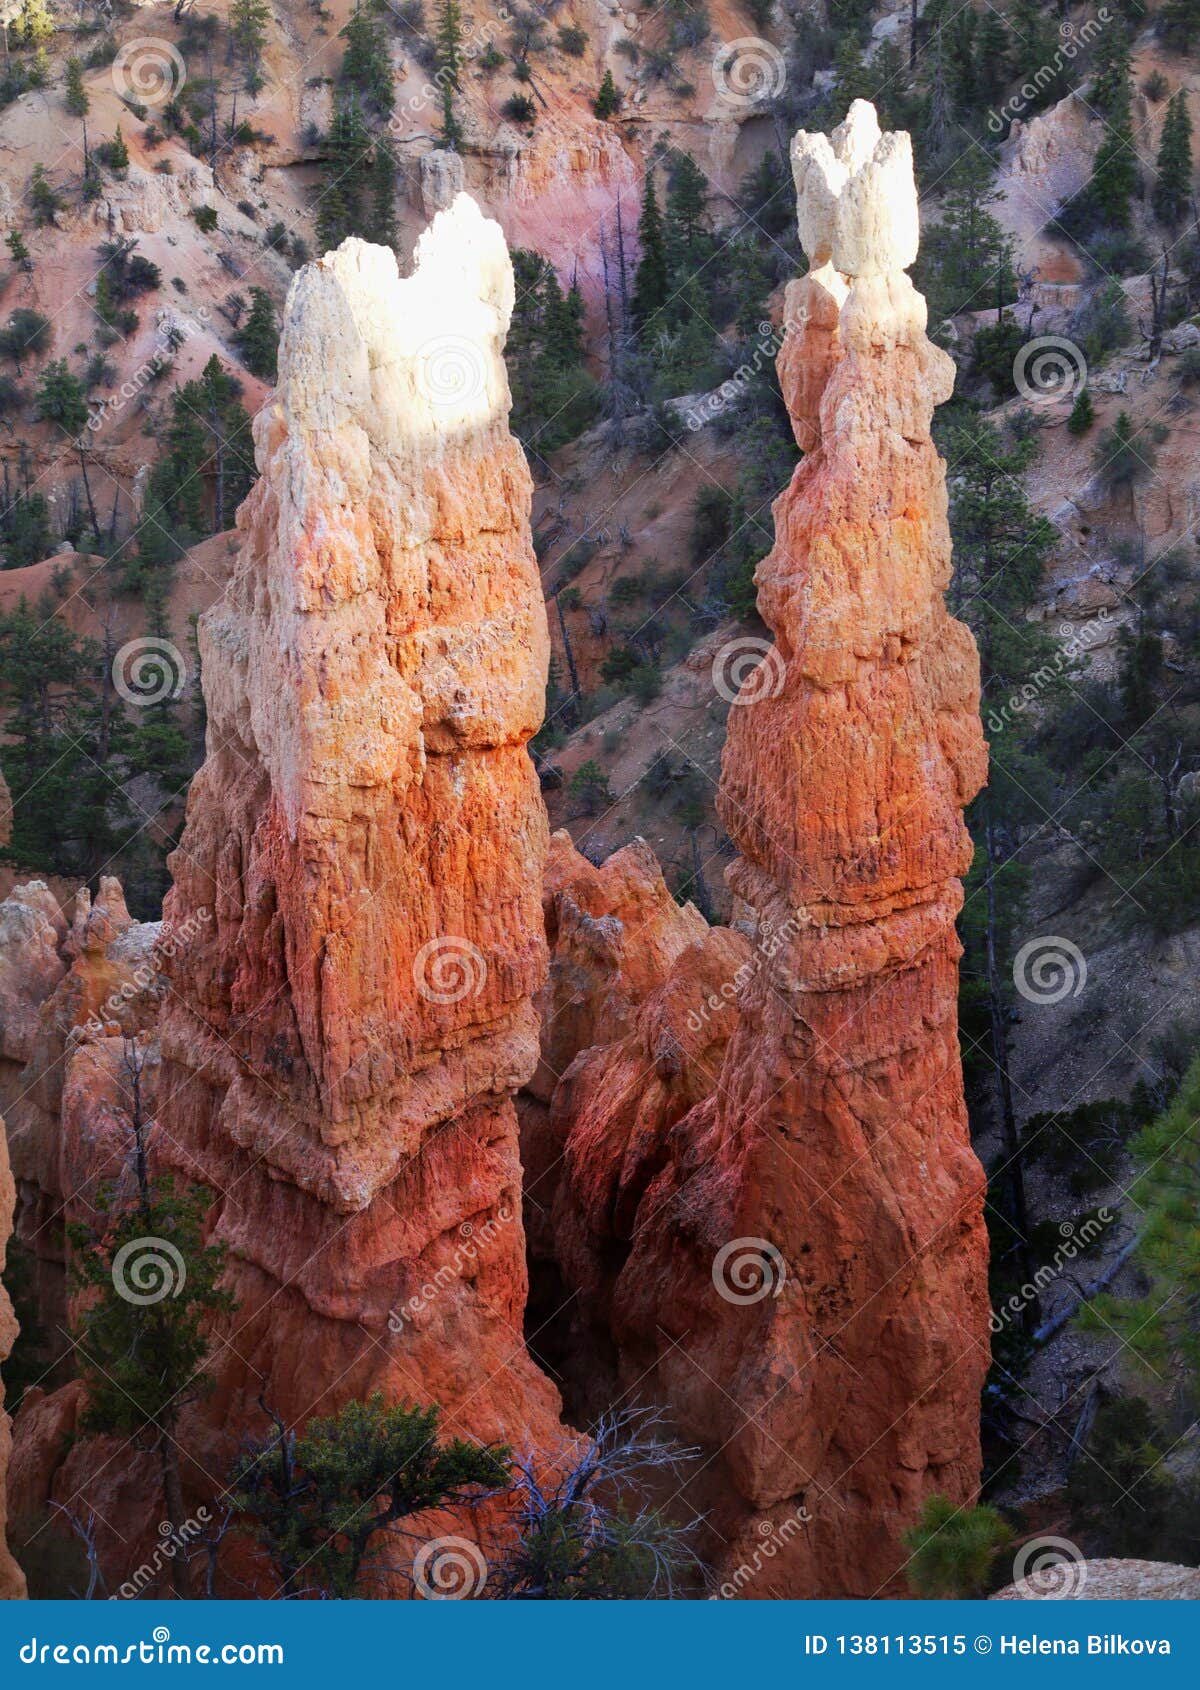 us national parks, bryce canyon national park